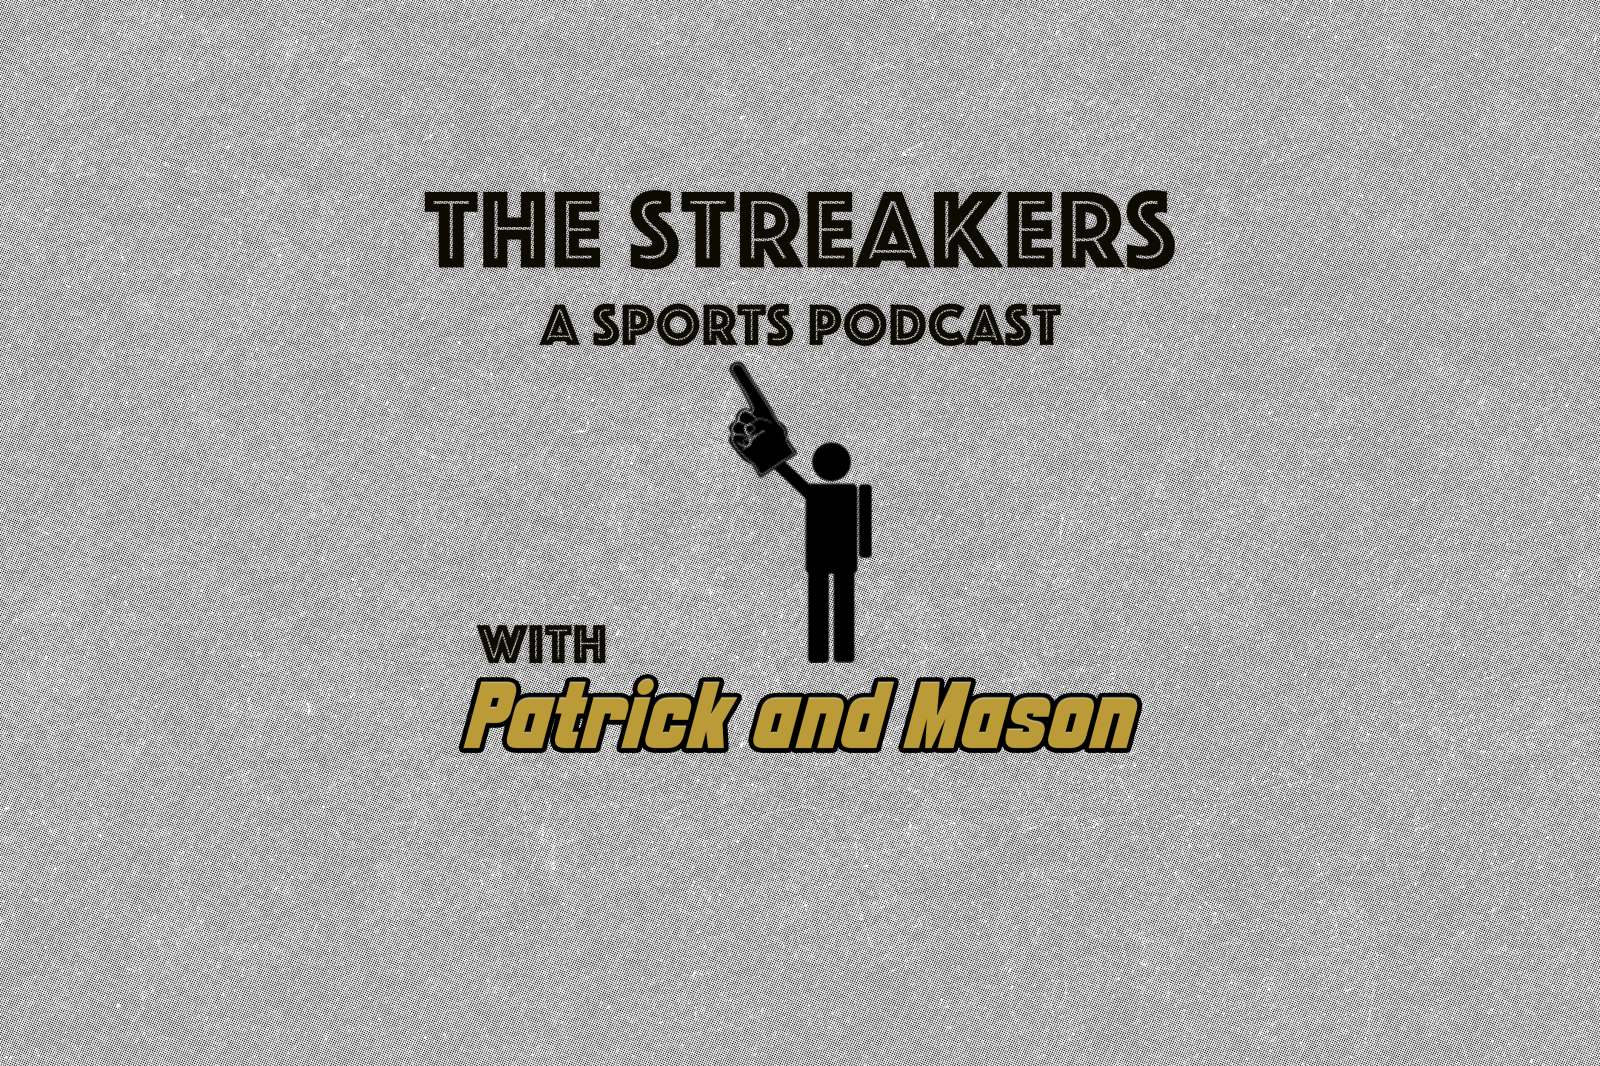 The Streakers: A Sports Podcast